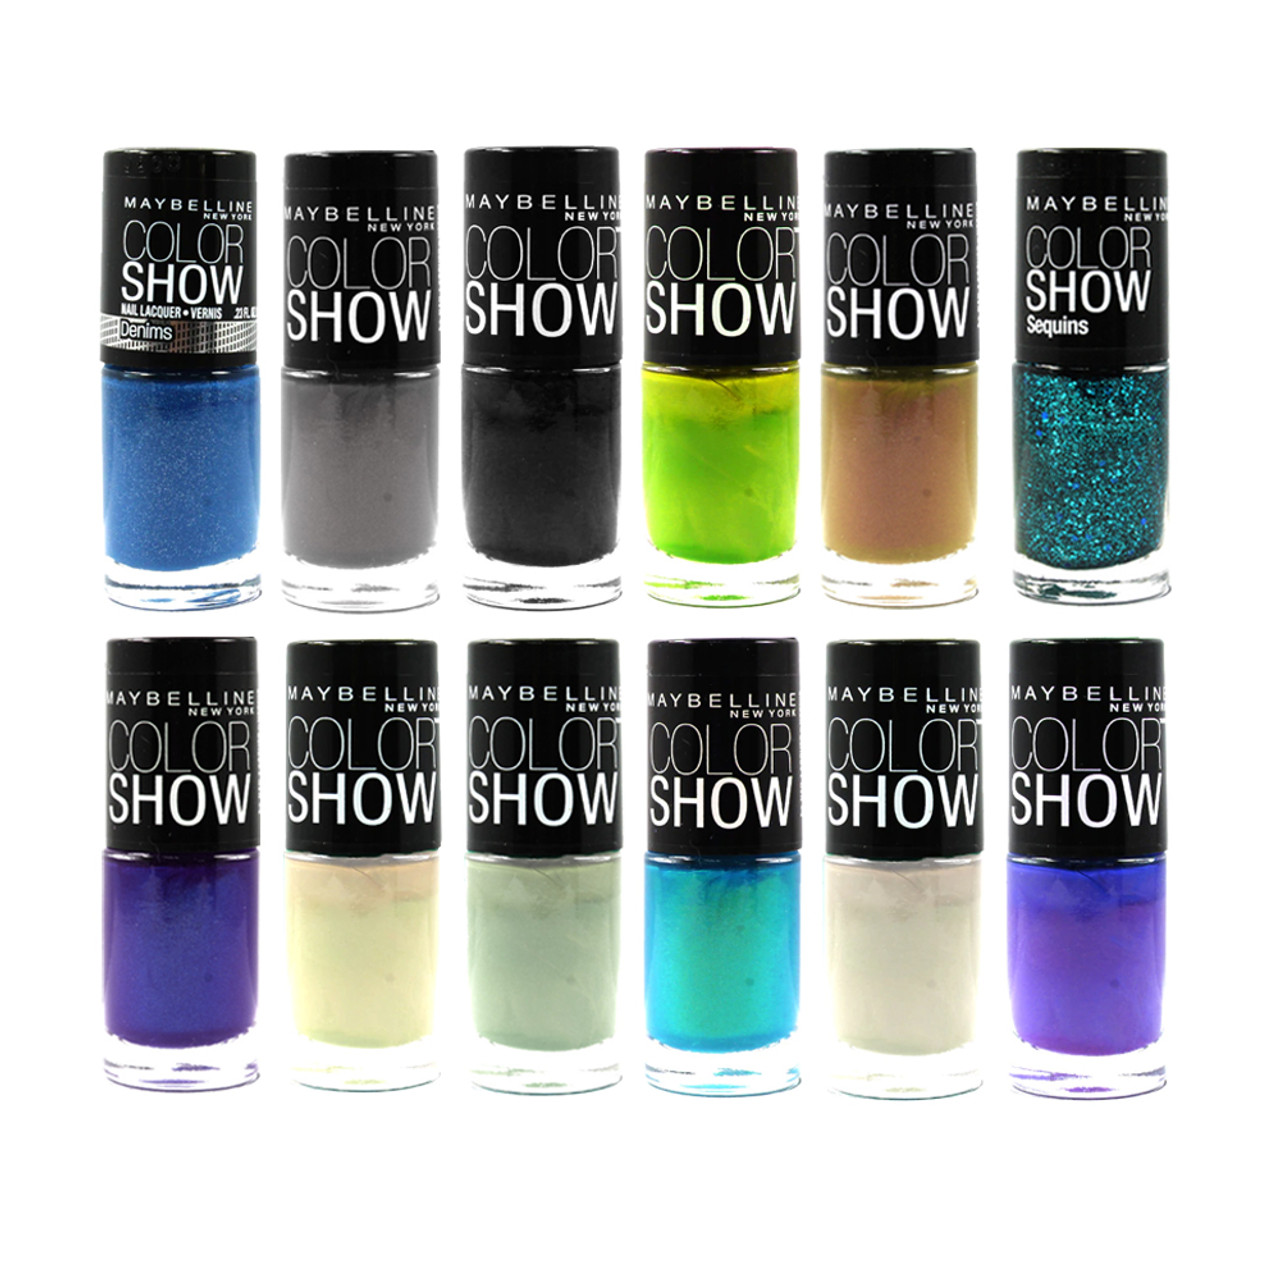 Show 12-Pack Nail Color Lacquer Maybelline